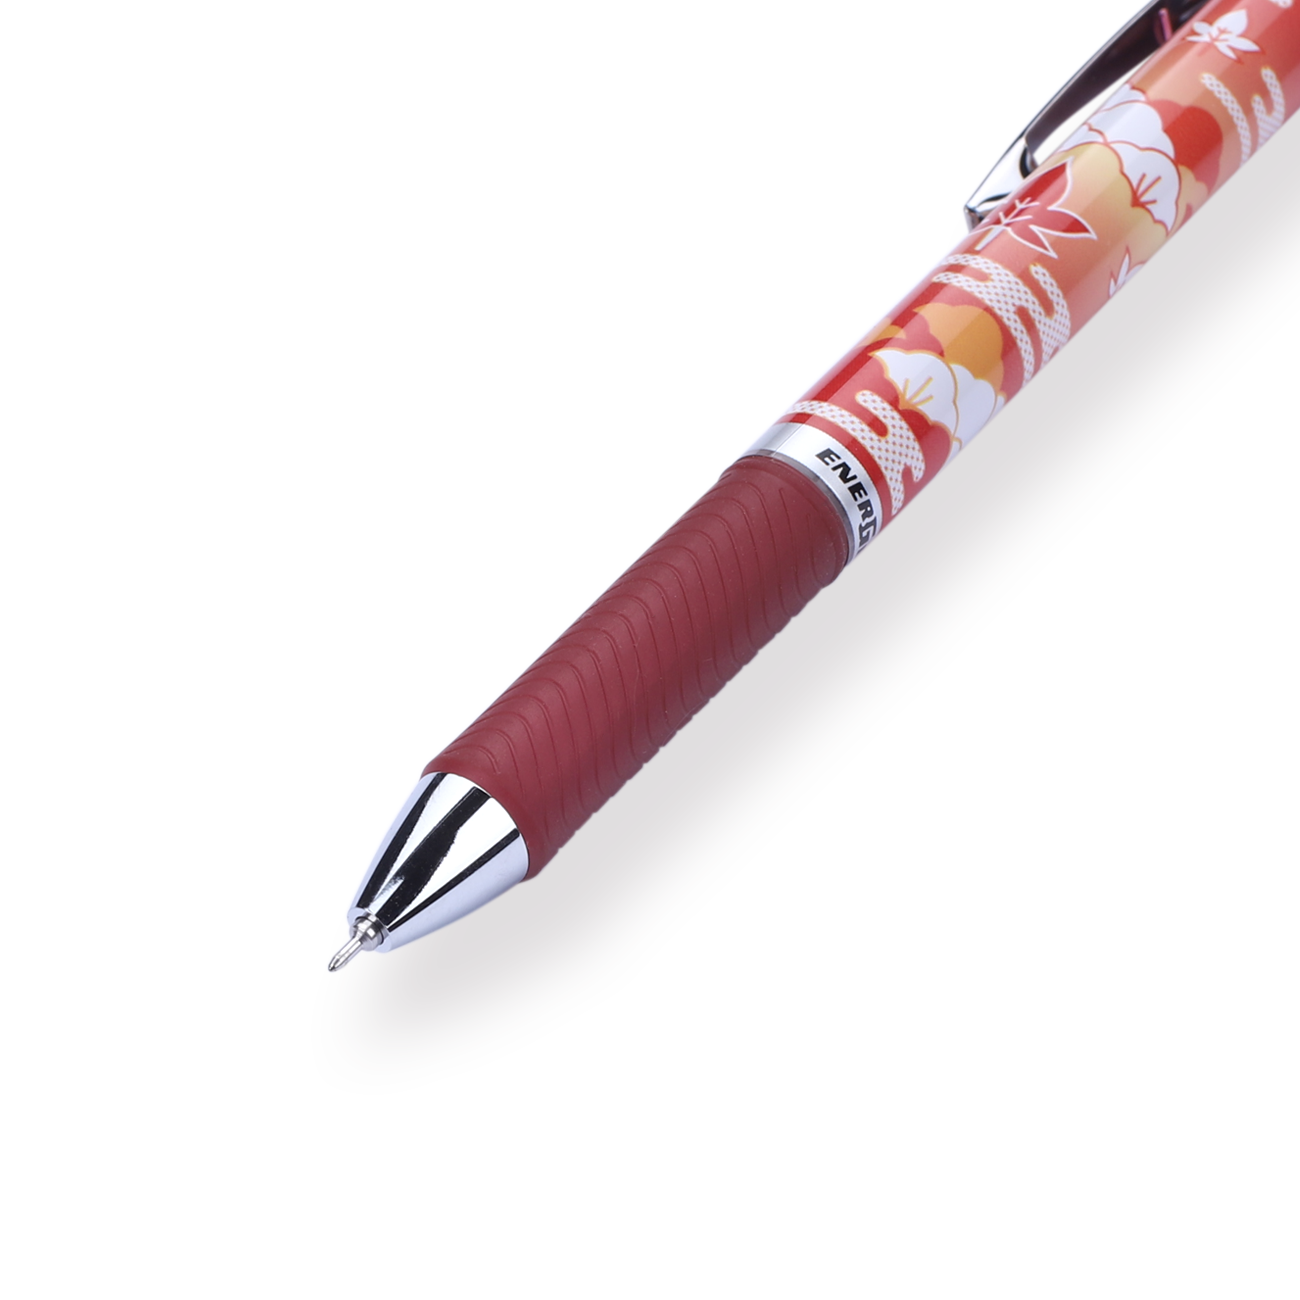 Pentel EnerGel Fall-themed Limited Edition Gel Pen - 0.5 mm - Red Grip - Stationery Pal